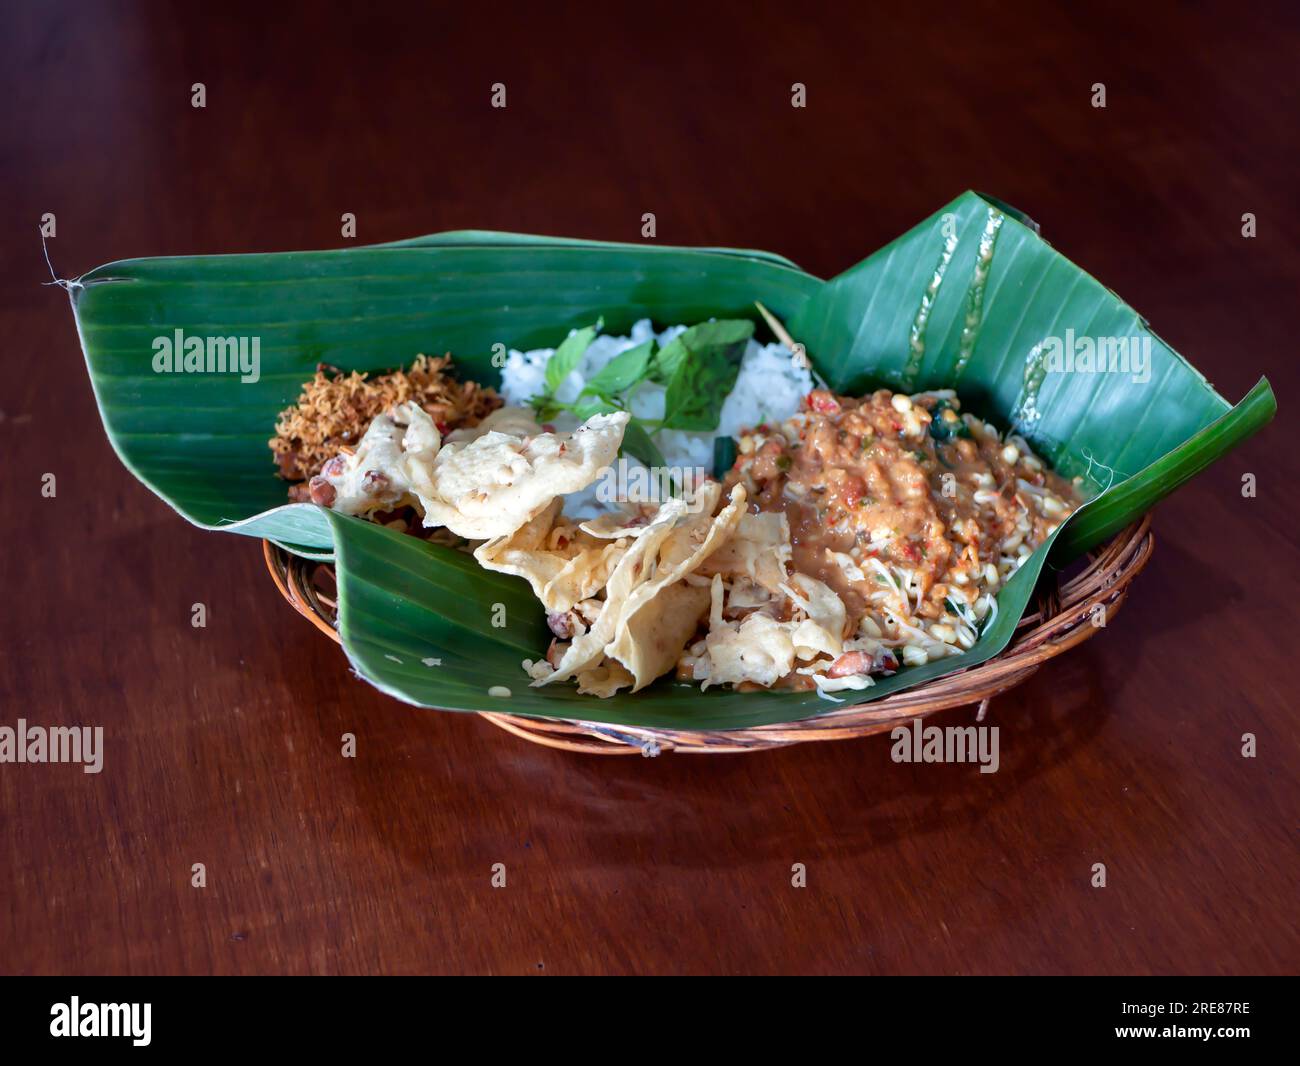 Pecel Pincuk, a Javanese traditional food, served on banana leaves, one of the environmentally friendly food packages. Stock Photo